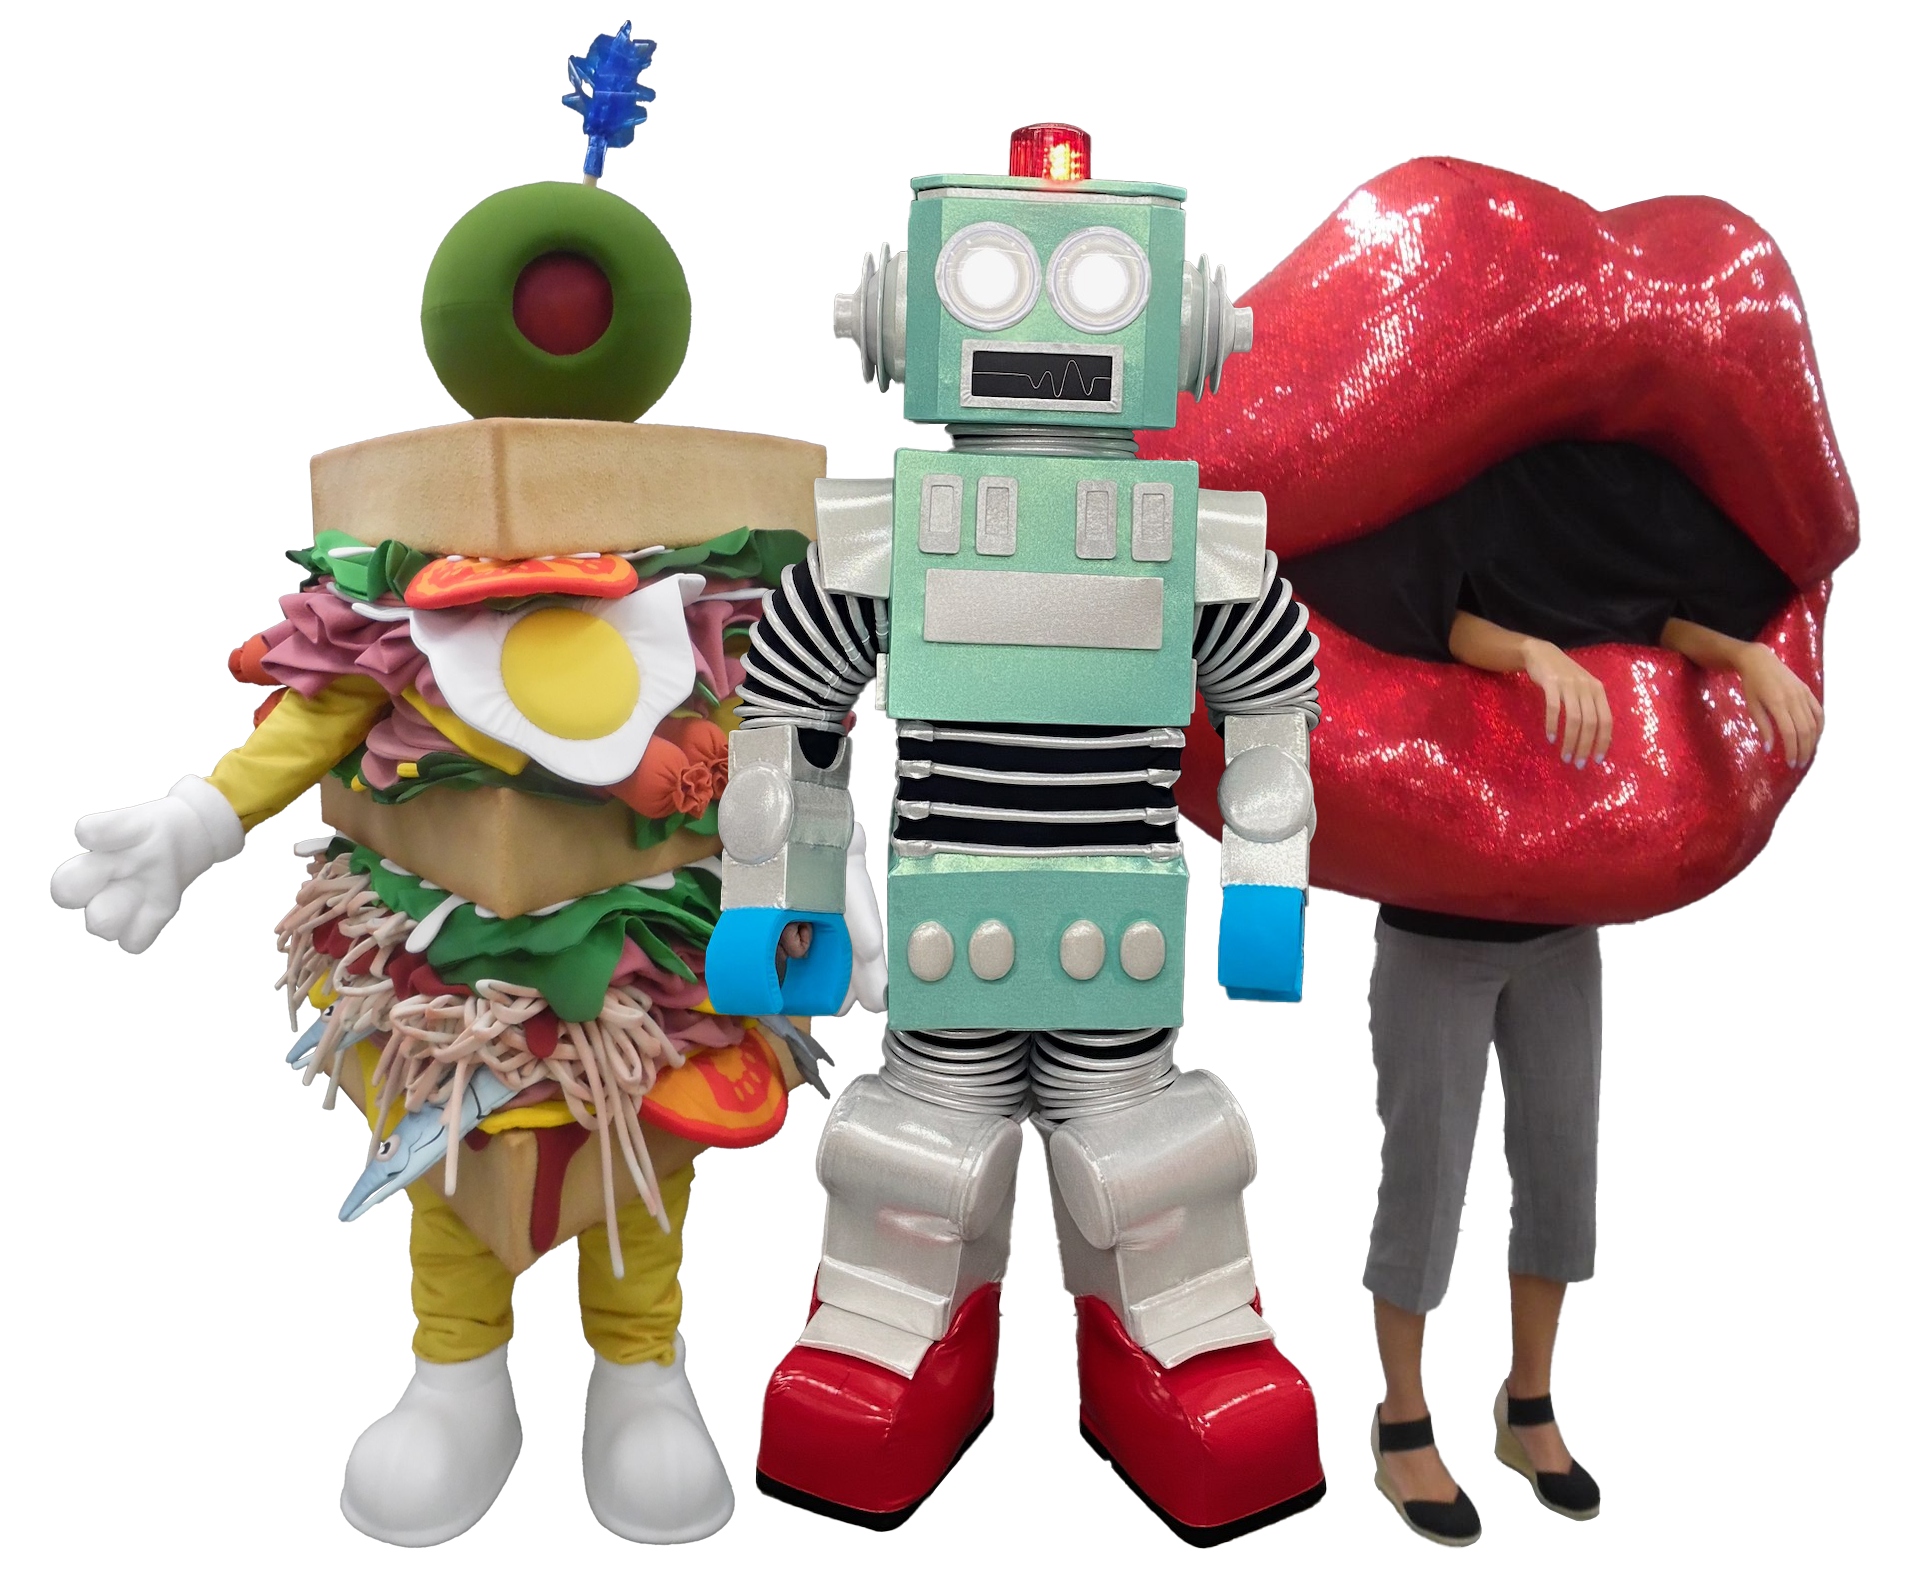 Three different masked singer mascots. A Sandwich, a robot, and a pair of lips.